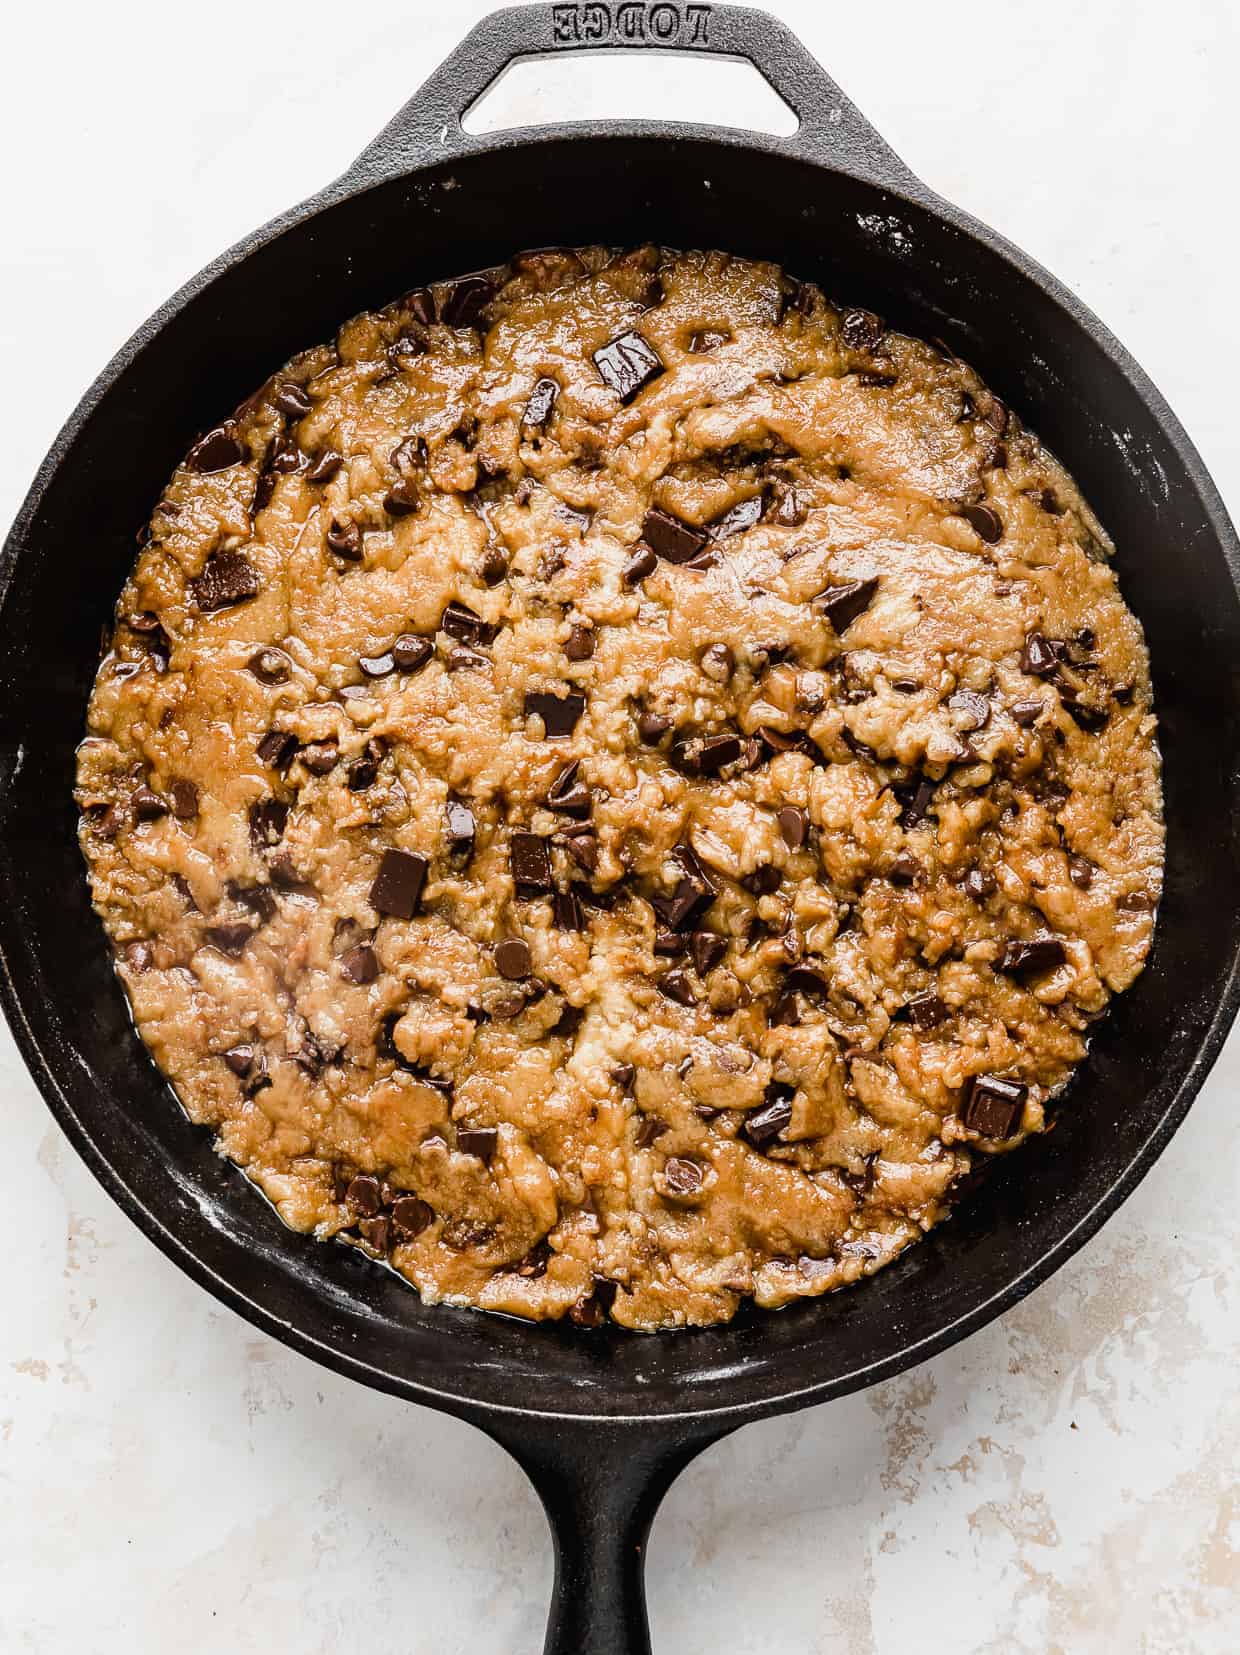 An unbaked pizookie (skillet chocolate chip cookie) in a cast iron skillet against a textured white background. 